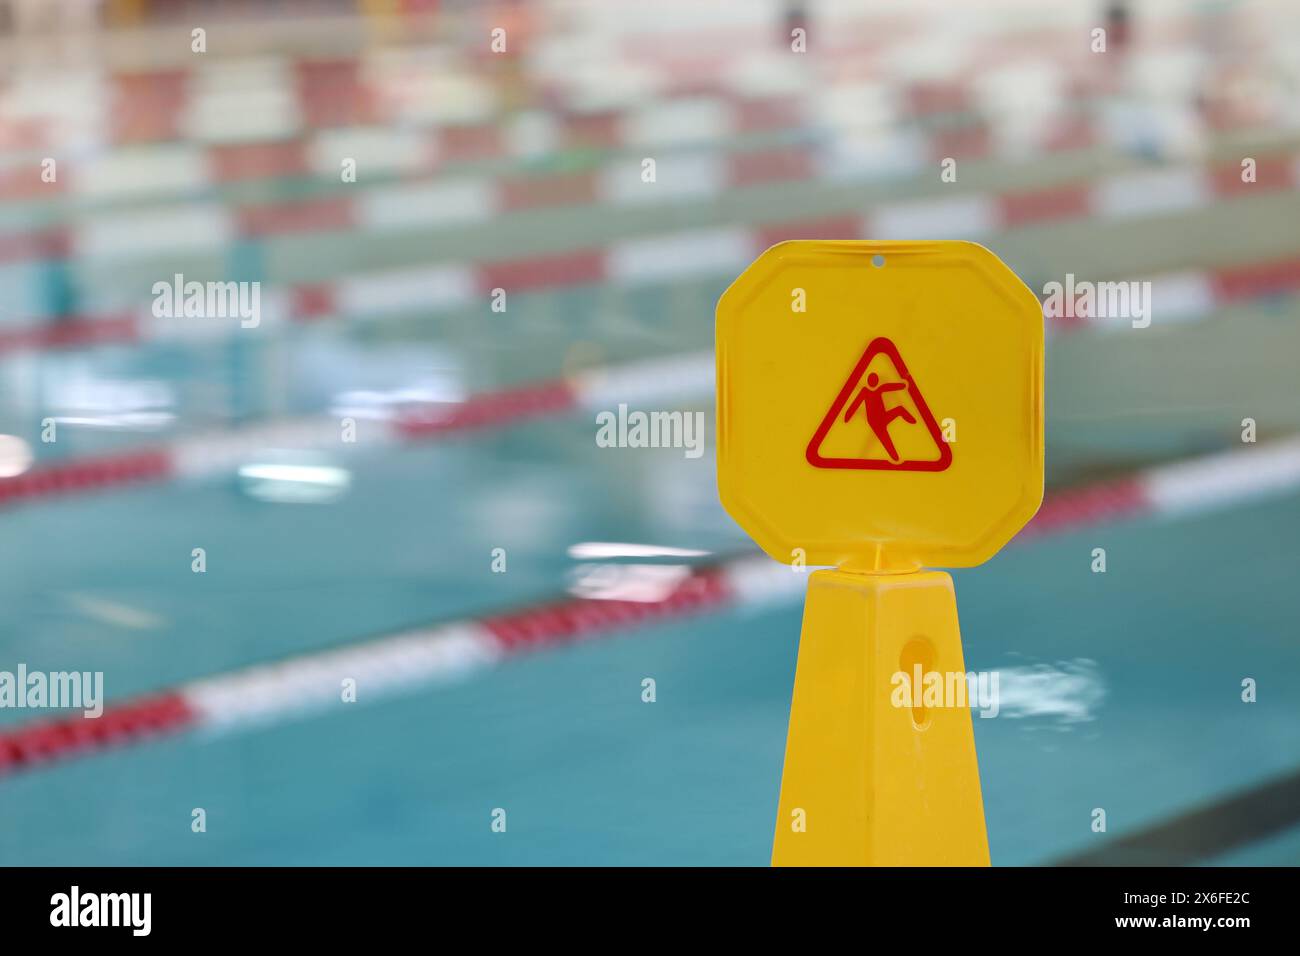 Yellow slip fall hazard sign at a public swimming pool. Public liability and insurance preventing accidents and injury. Stock Photo